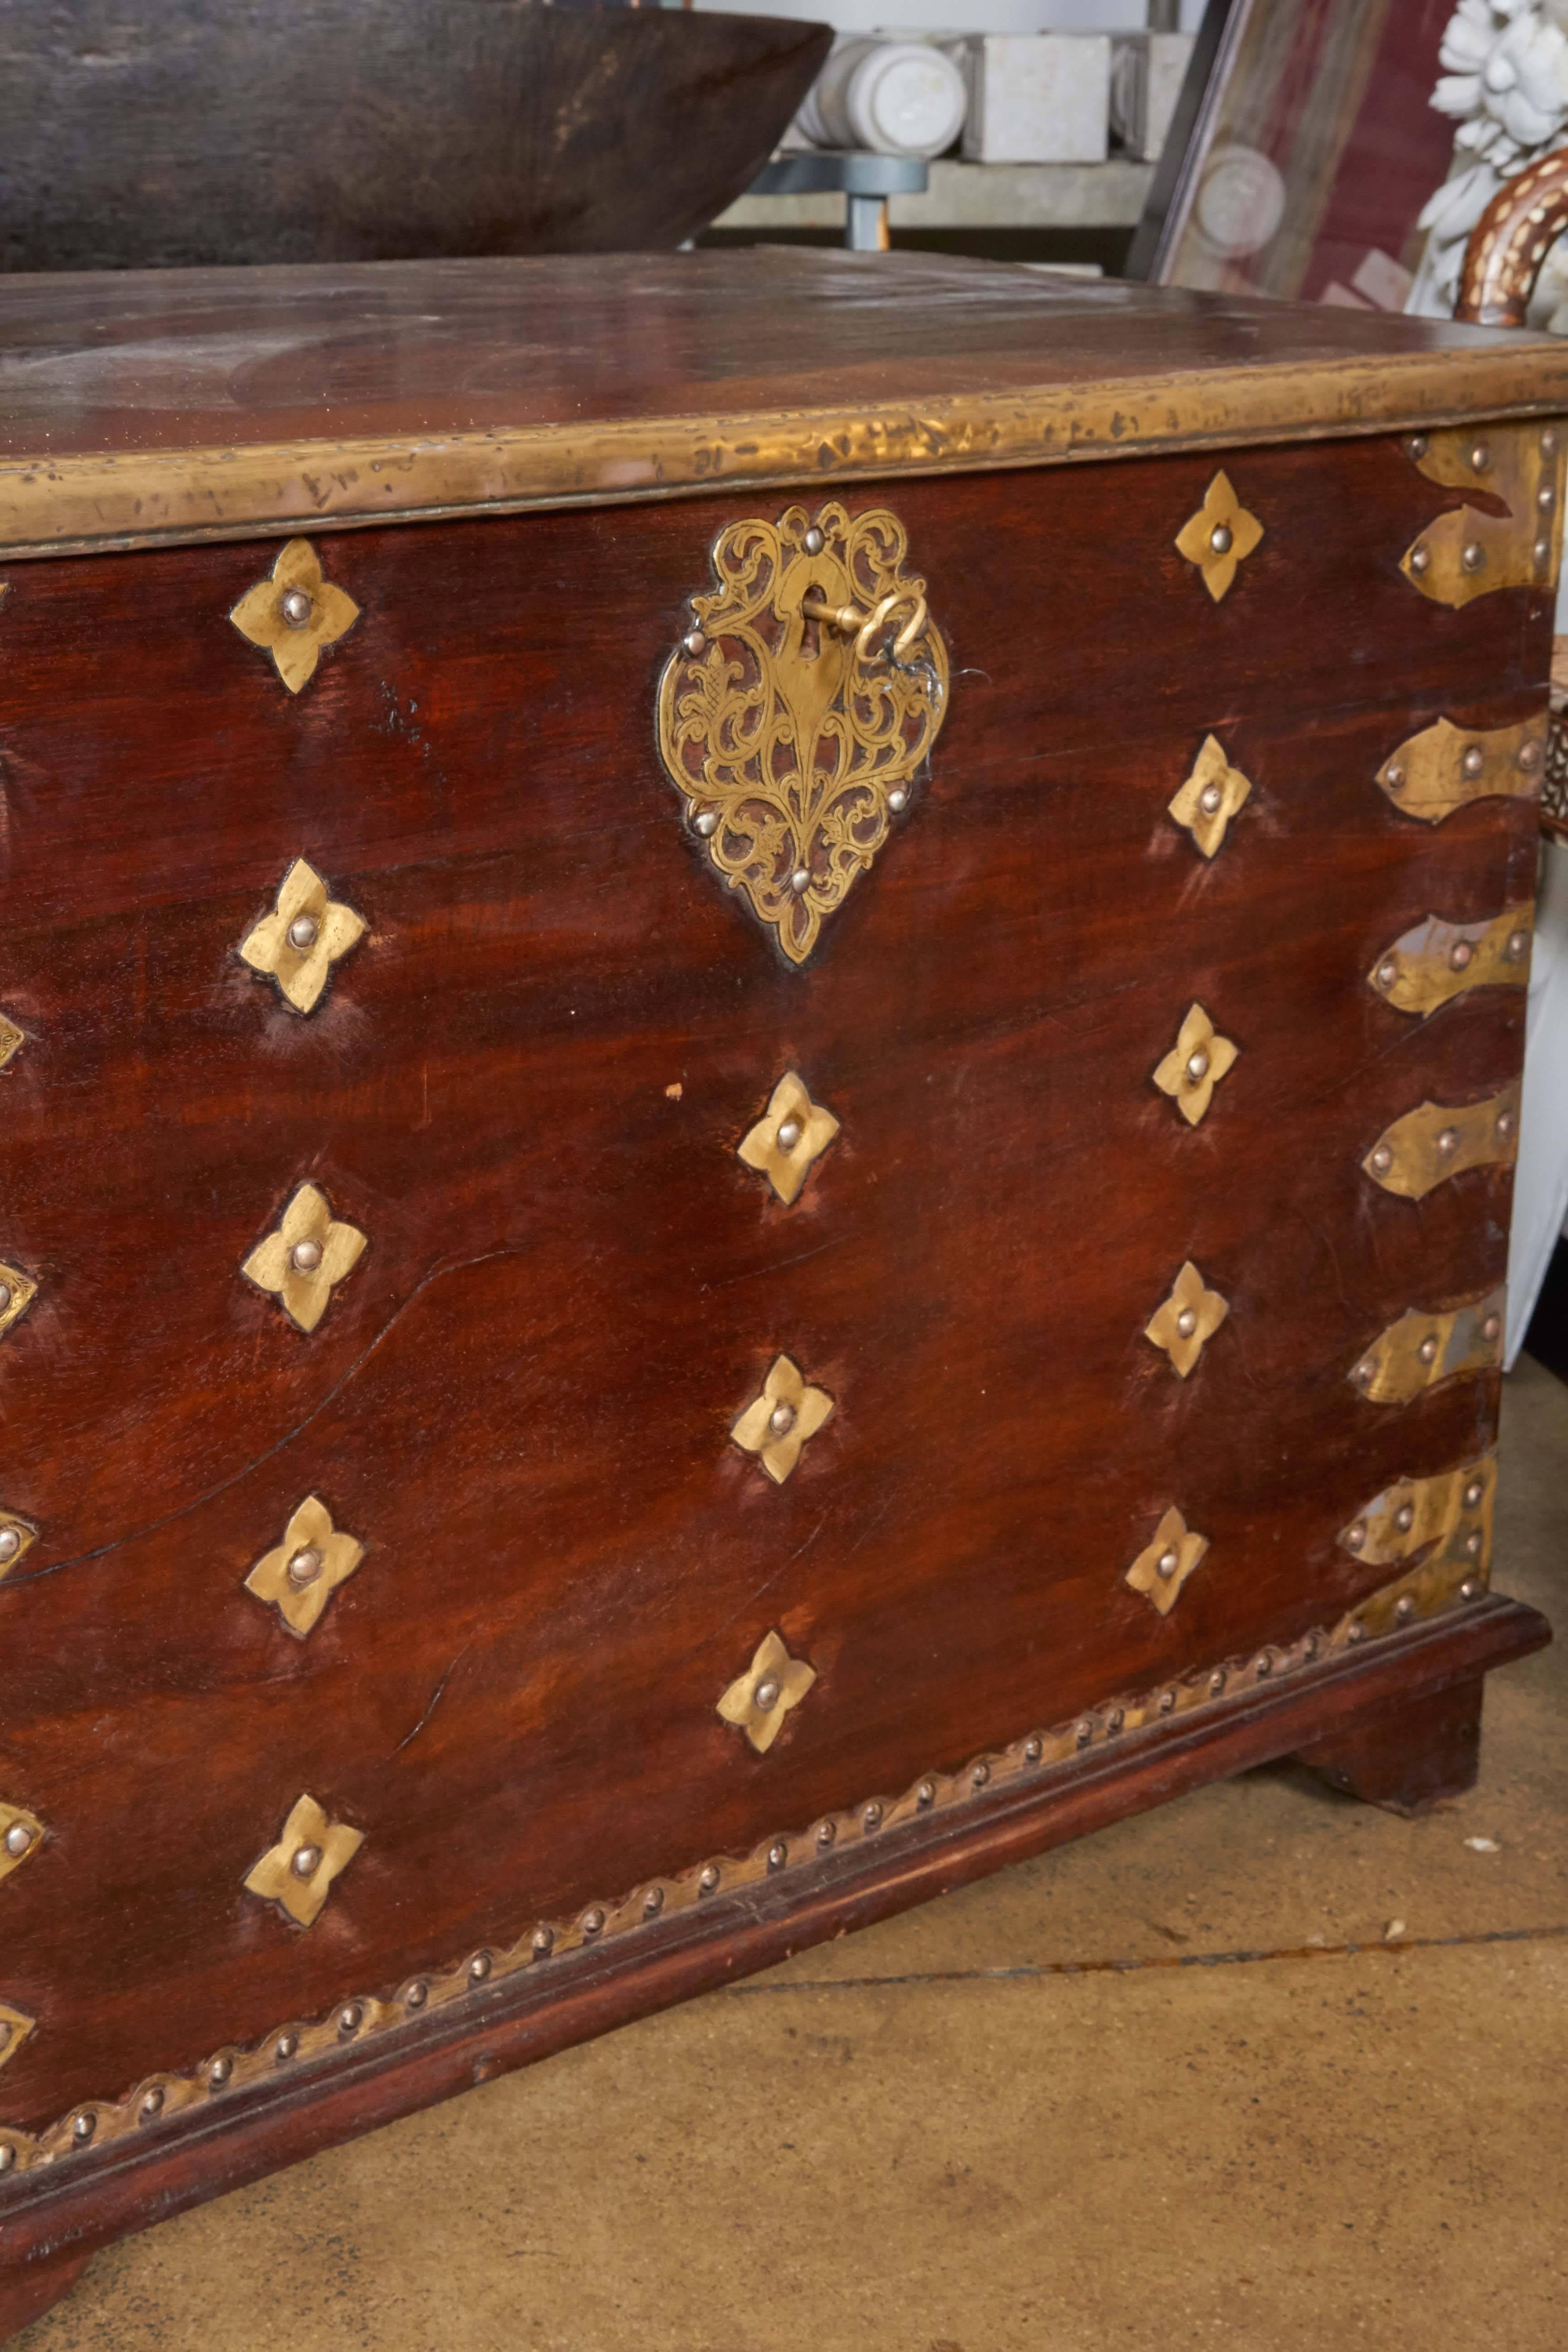 Brass Early 20th Century Polished Teak Trunk from Sumatra